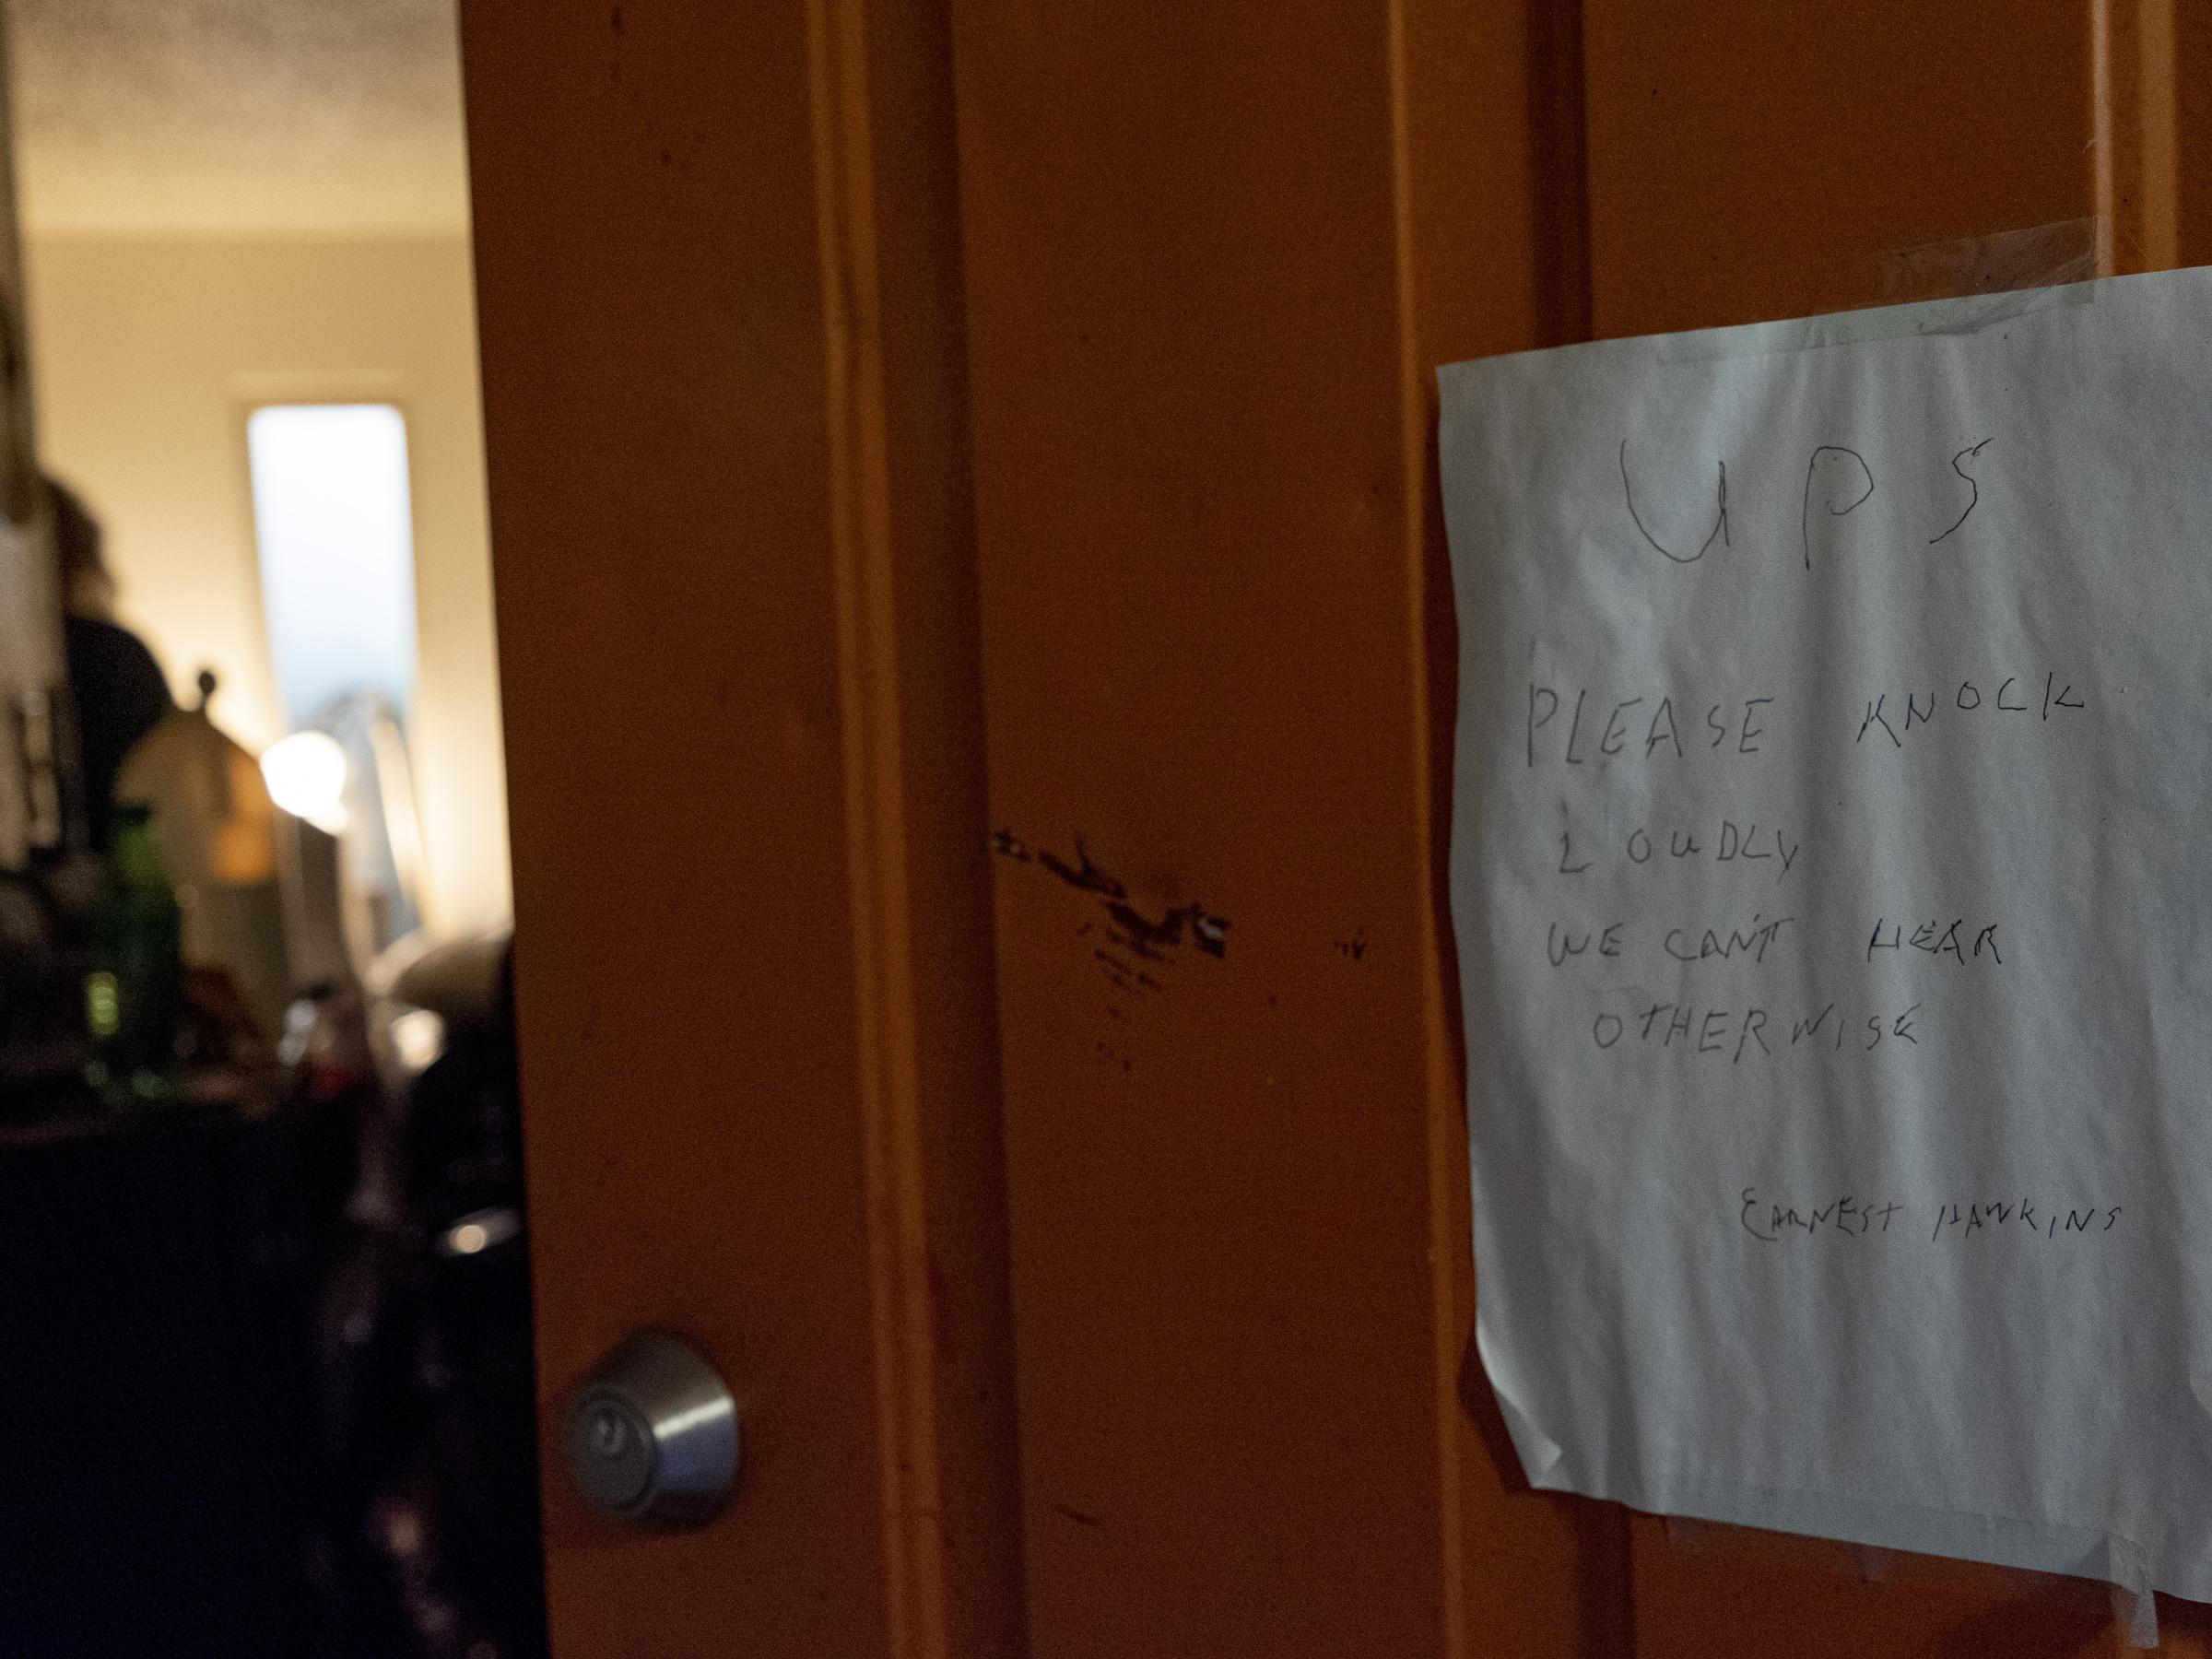 Heat Wave in Antioch - A note on the door to Earnest Hawkin’s apartment...